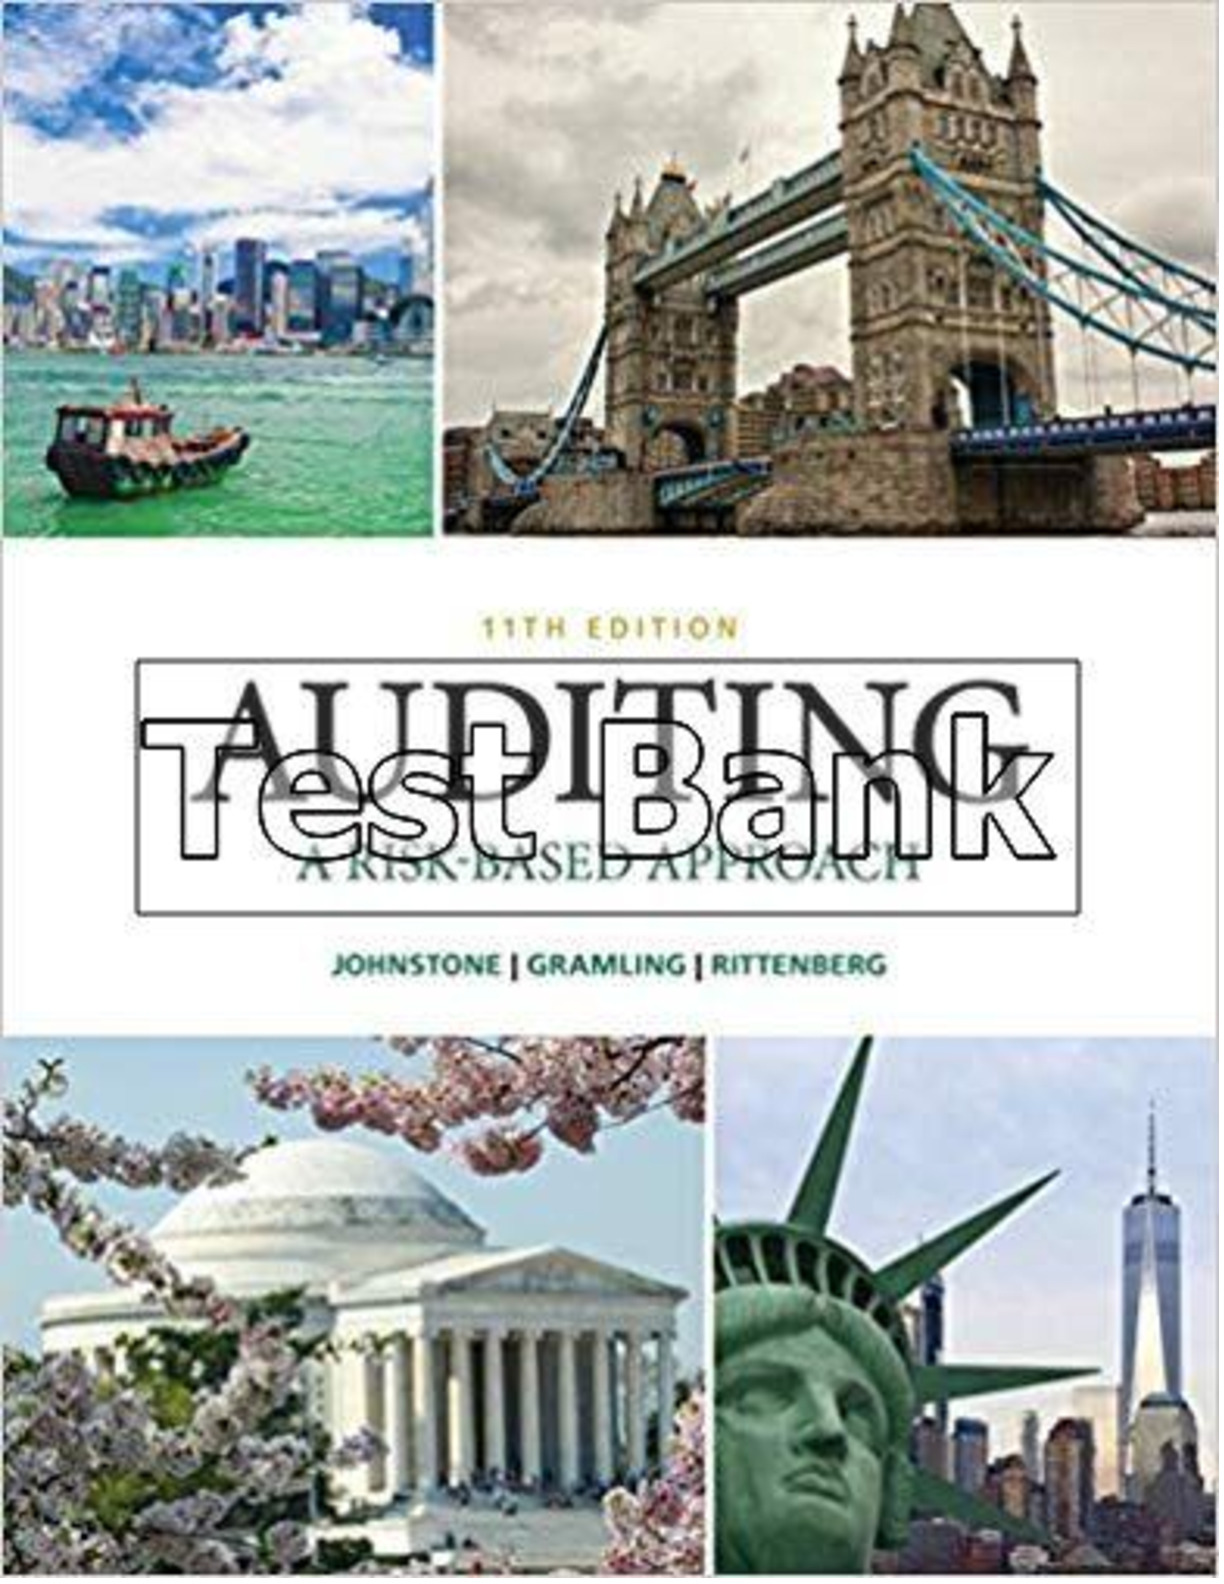 Auditing A Risk Based Approach 11th Edition Johnstone Test Bank